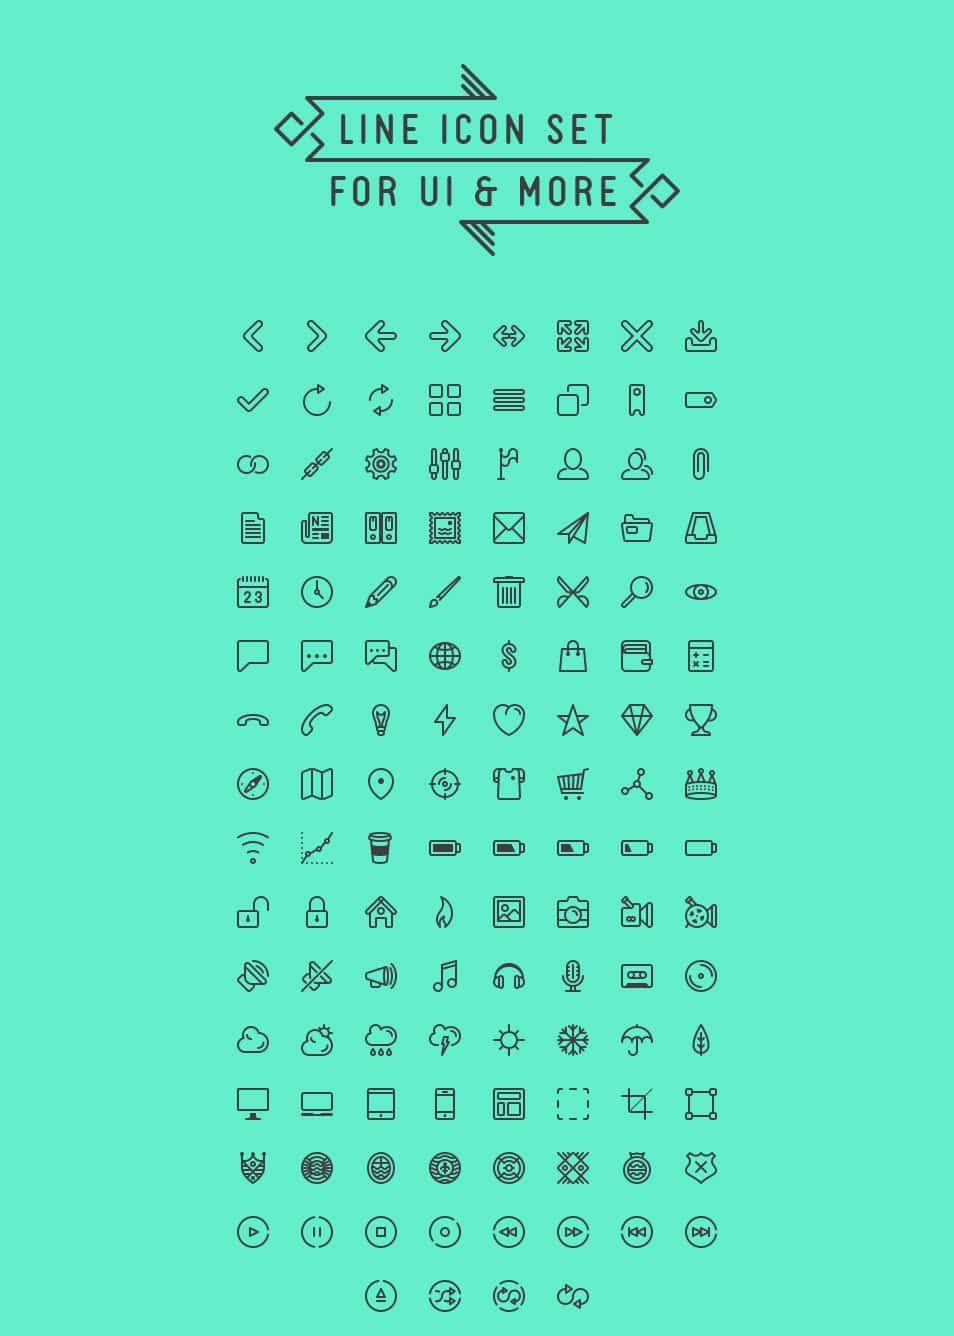 Line icon set for UI & more